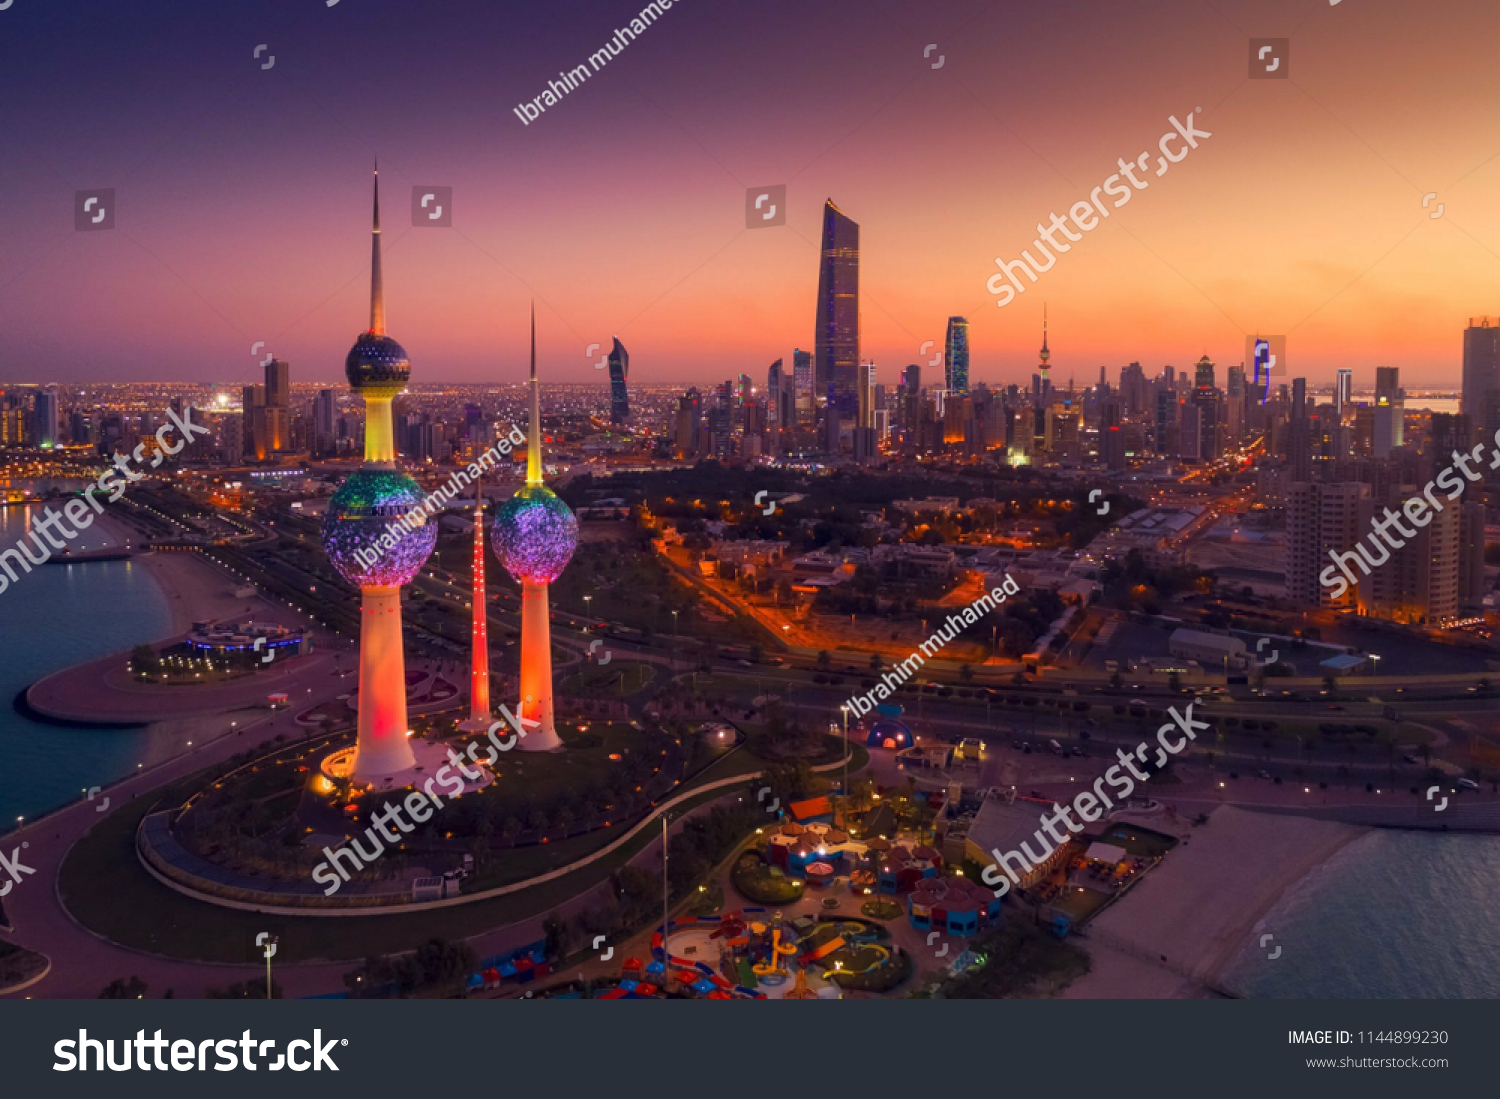 A wonderful shot of the State of Kuwait at night #1144899230